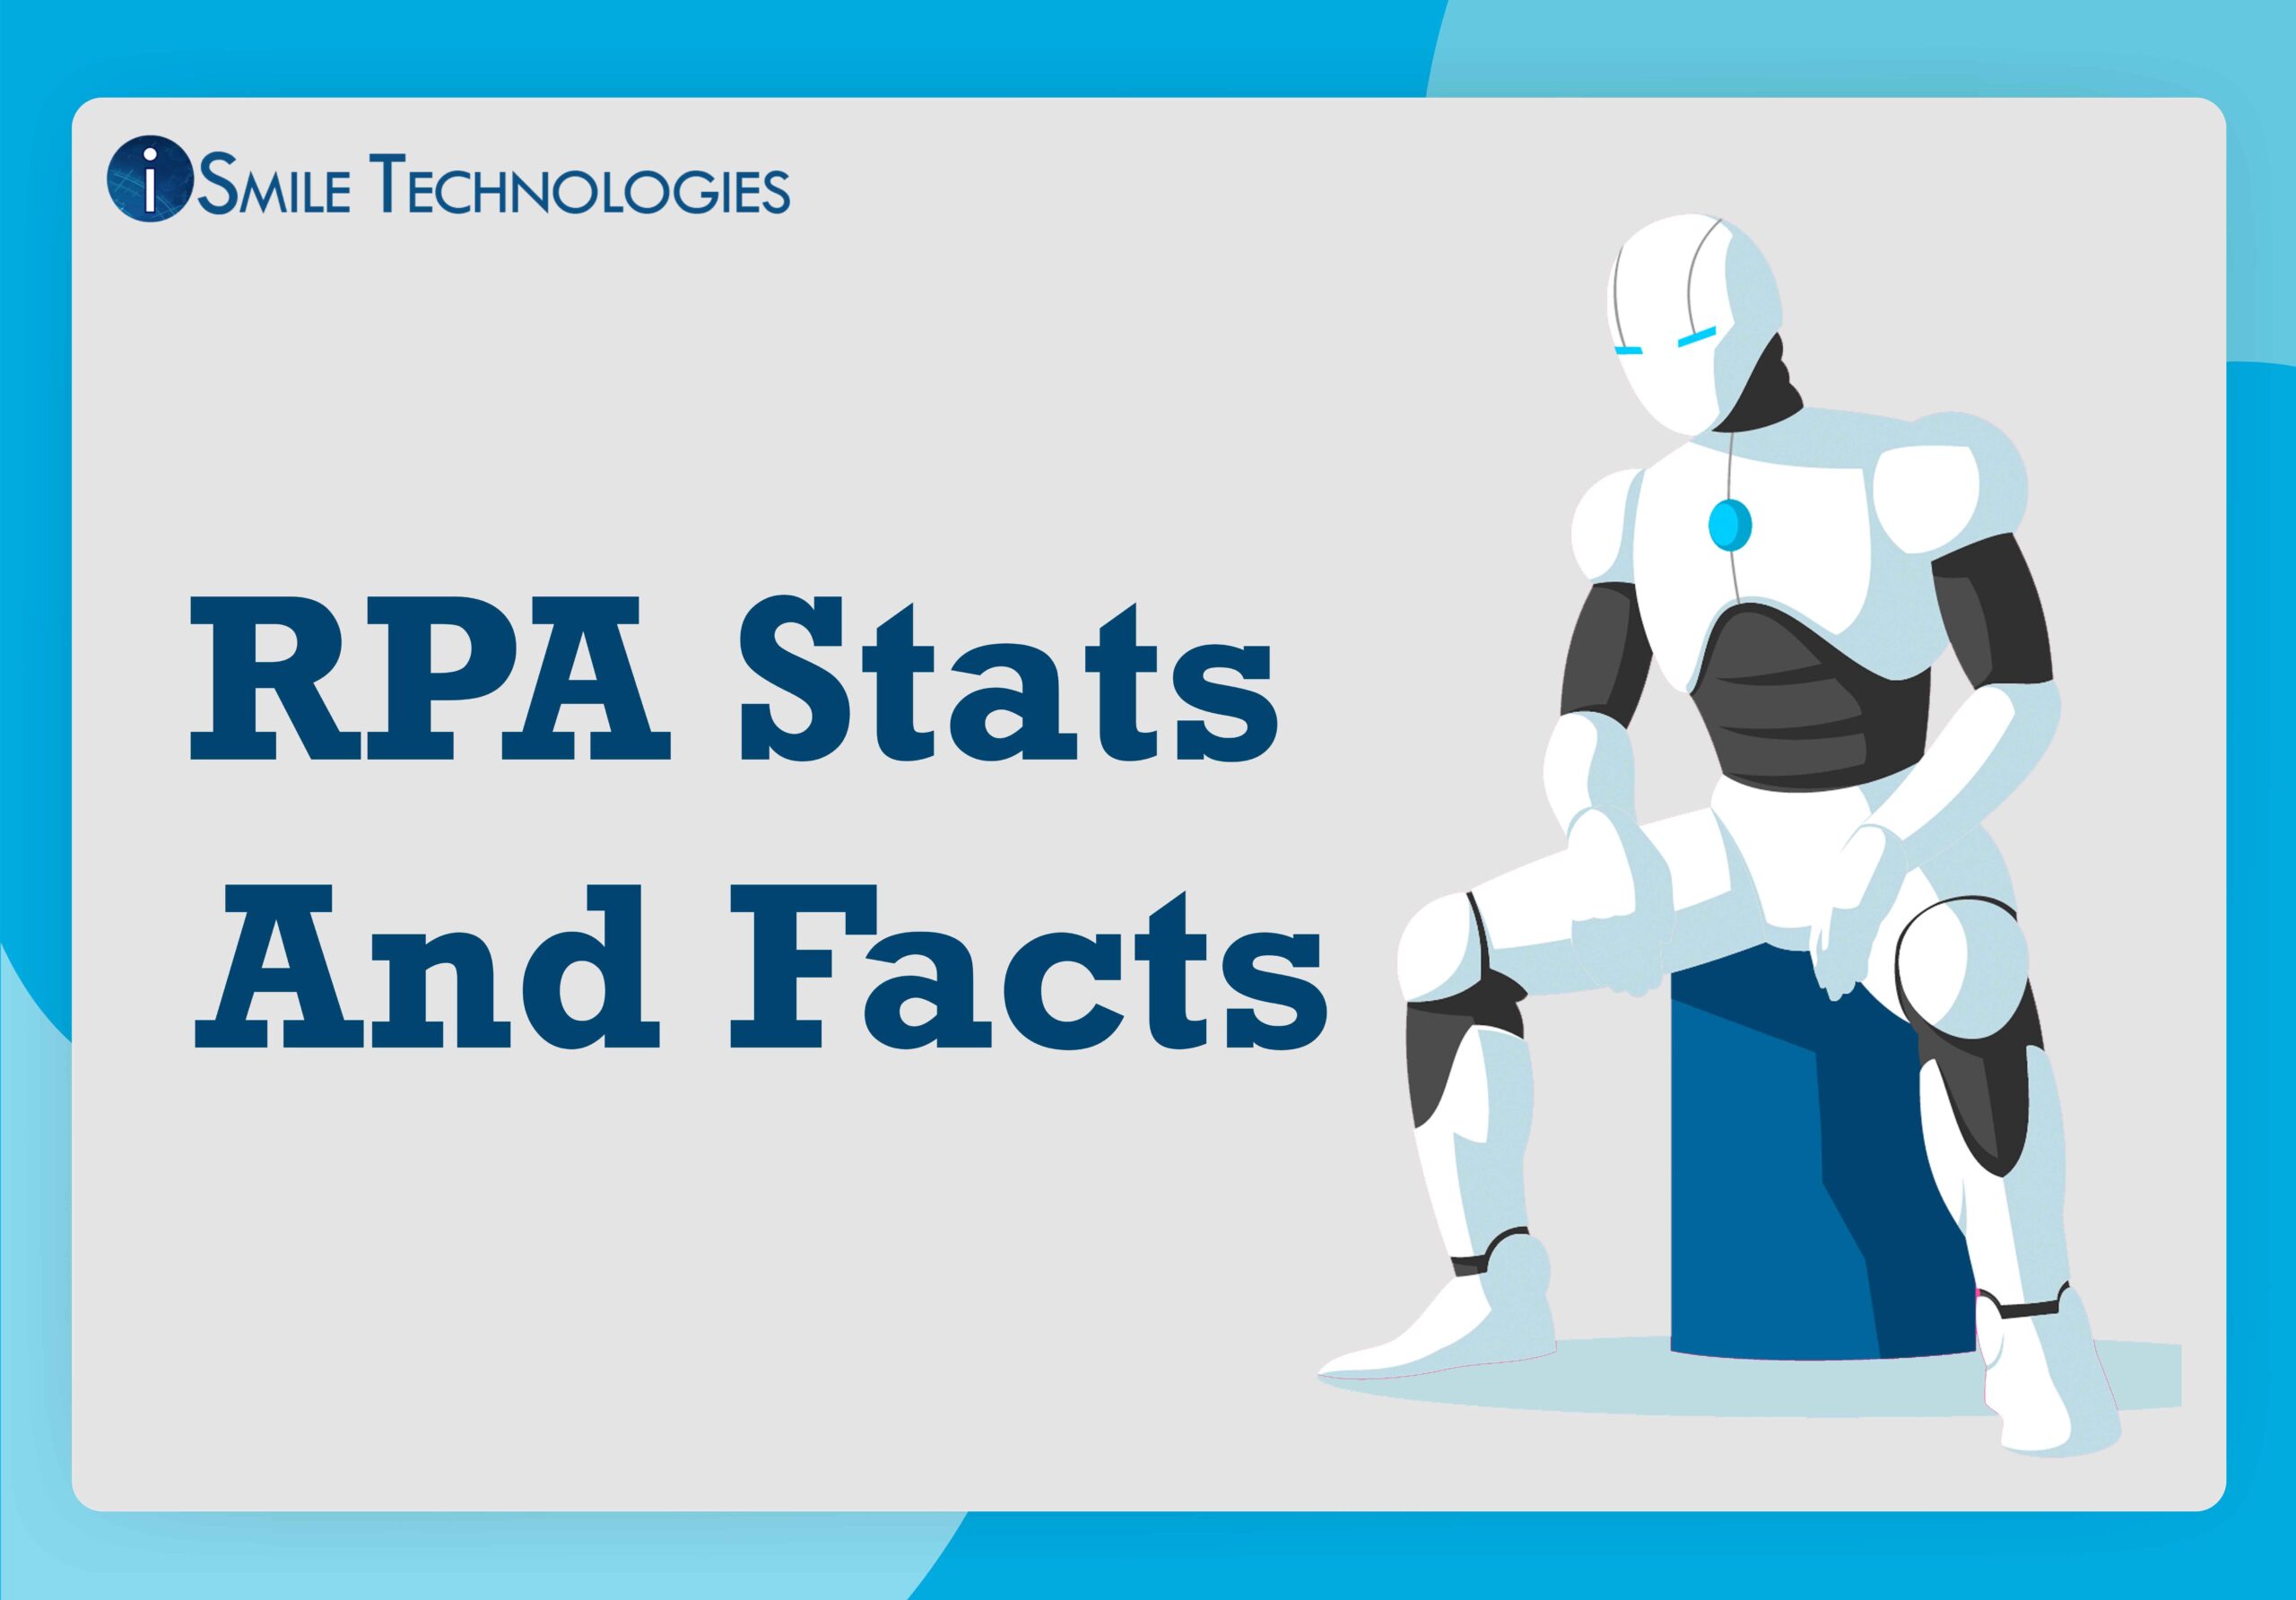 RPA Stats And Facts